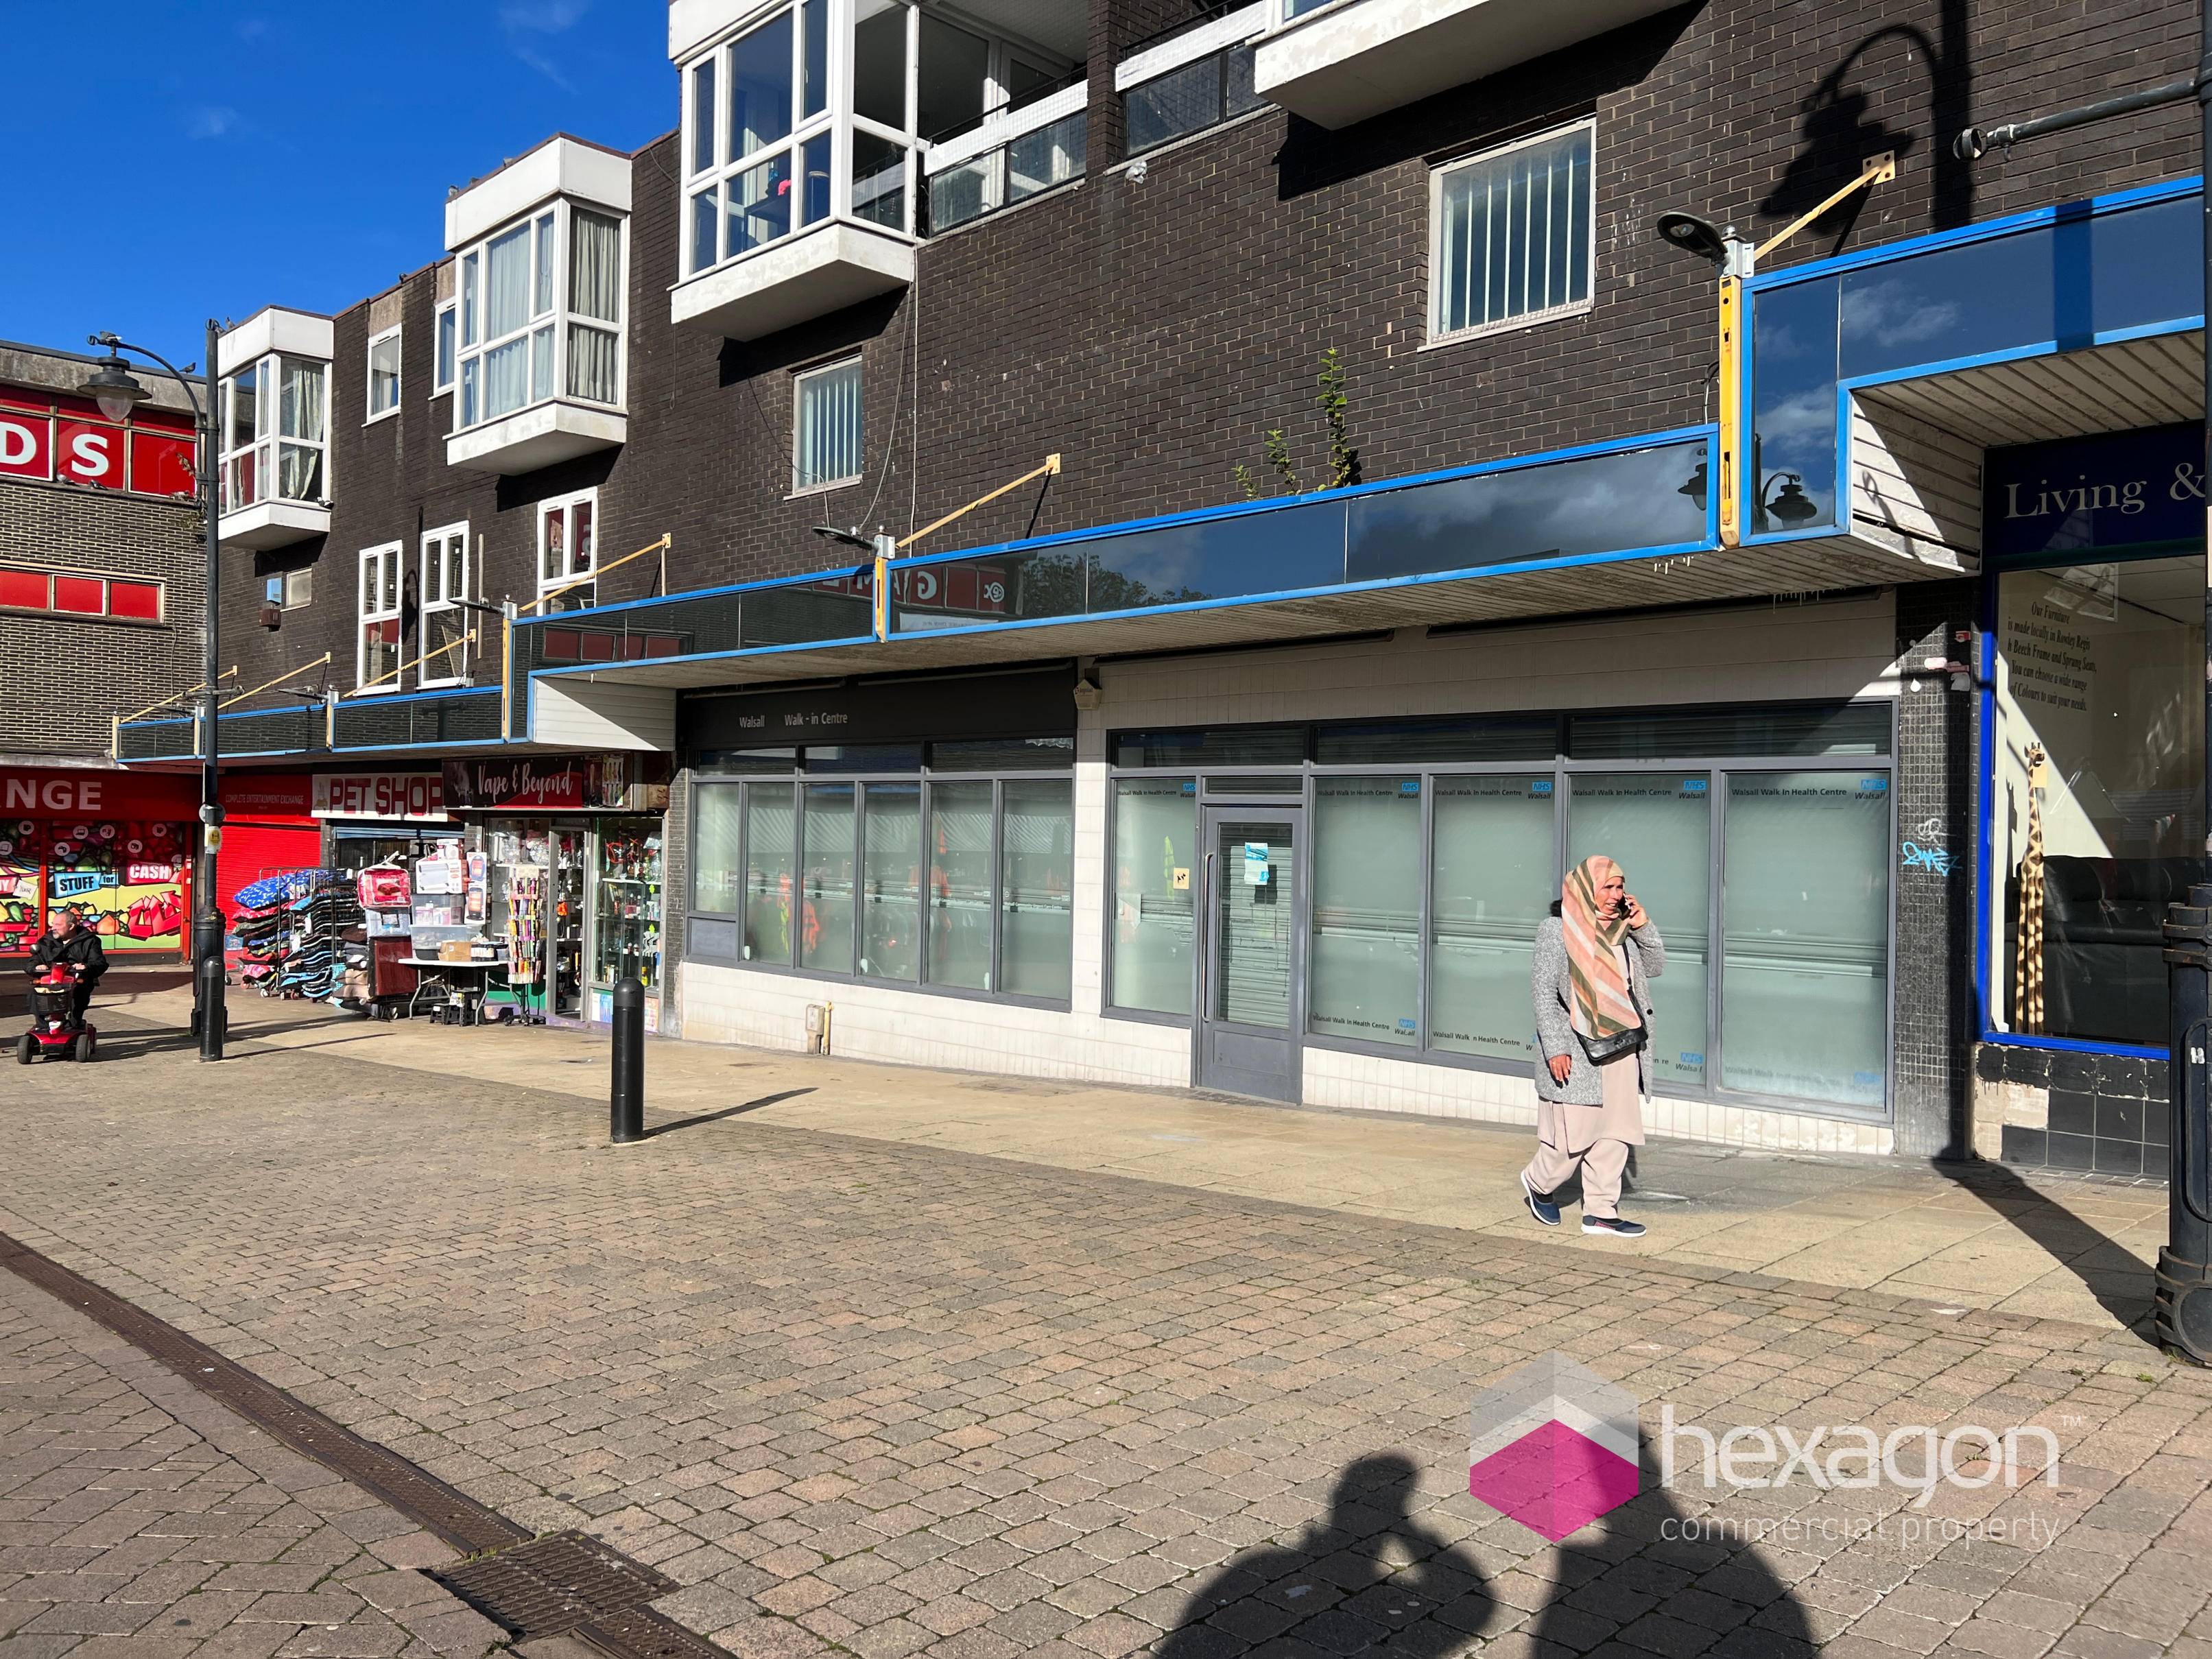 0 bed Retail Property (High Street) for rent in Walsall. From Hexagon Commercial Property